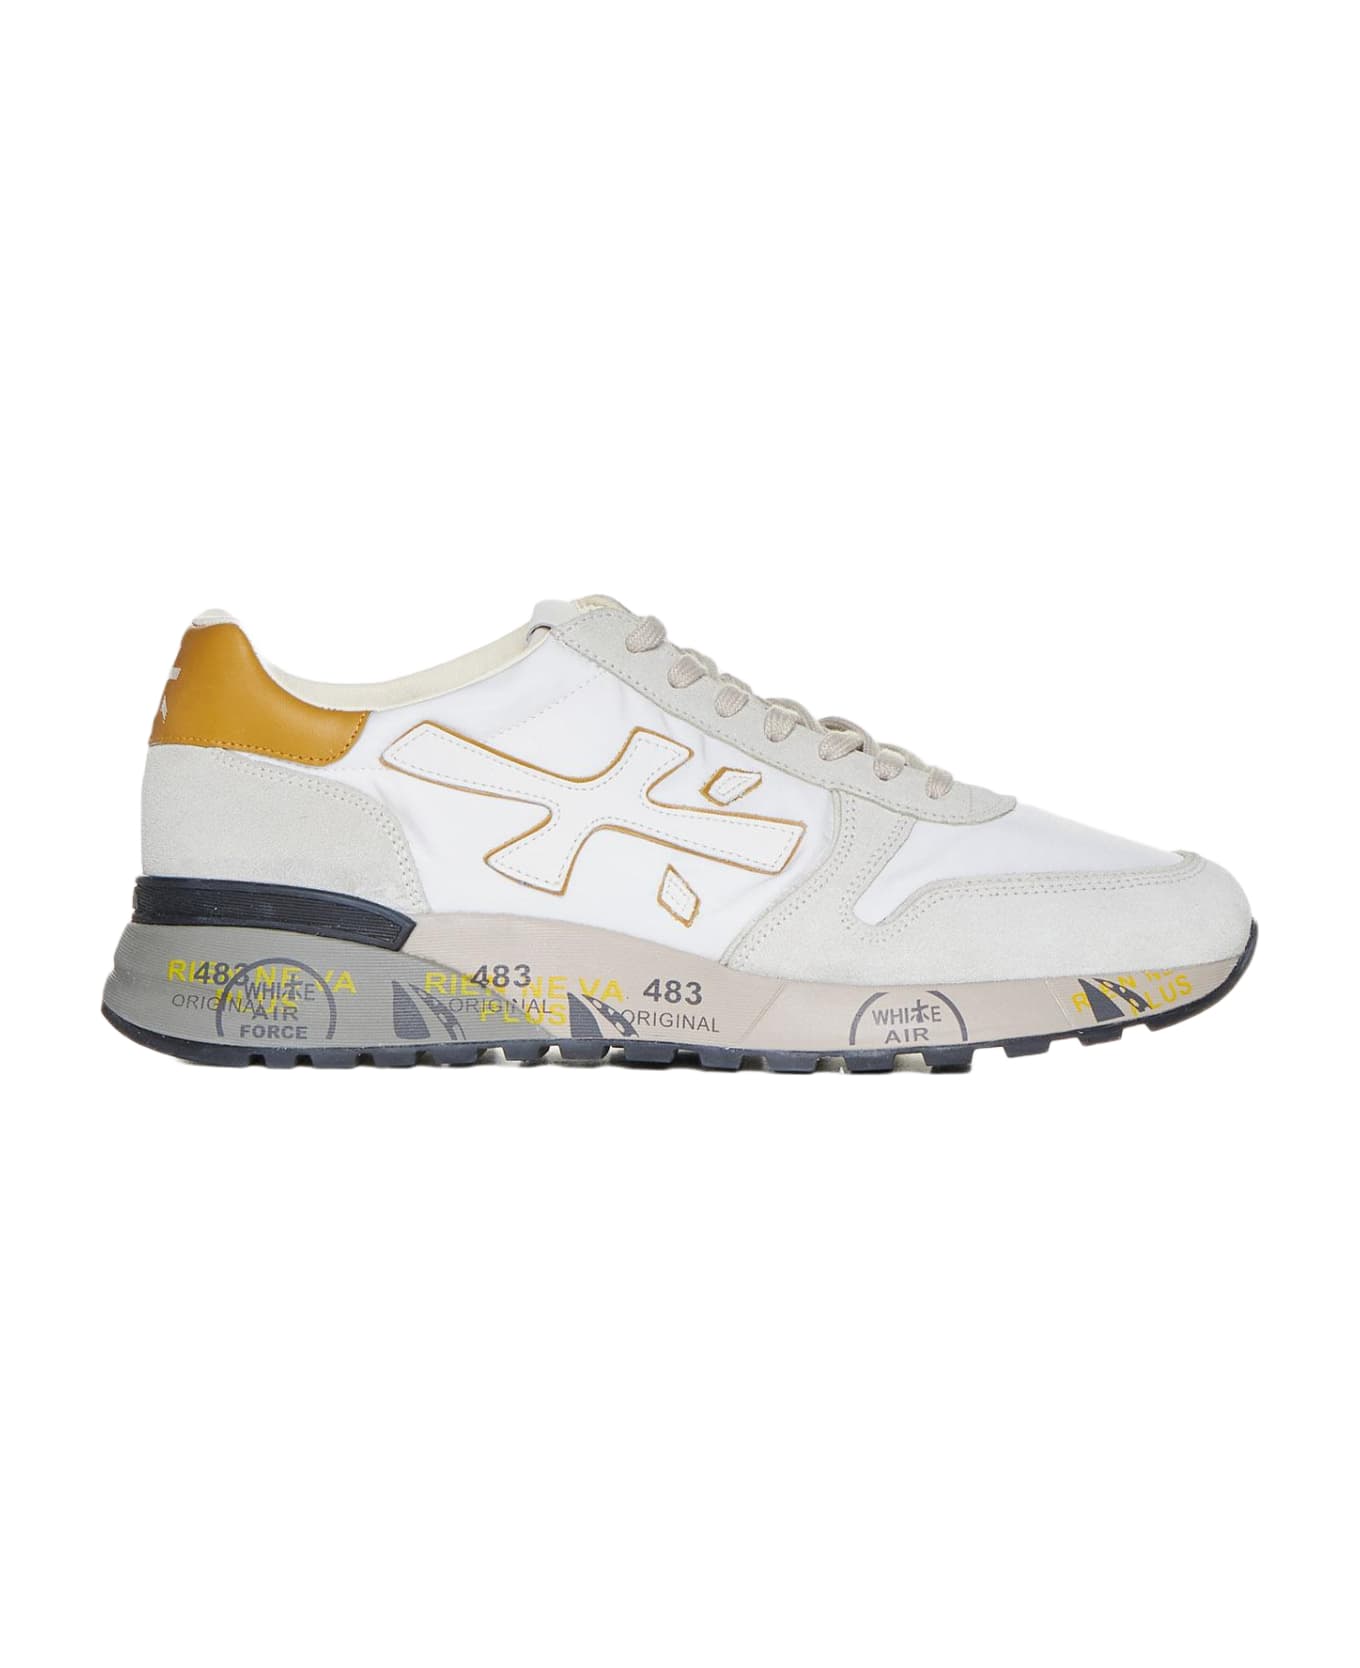 Premiata Mick Suede, Nylon And Leather Sneakers - Offwhite スニーカー